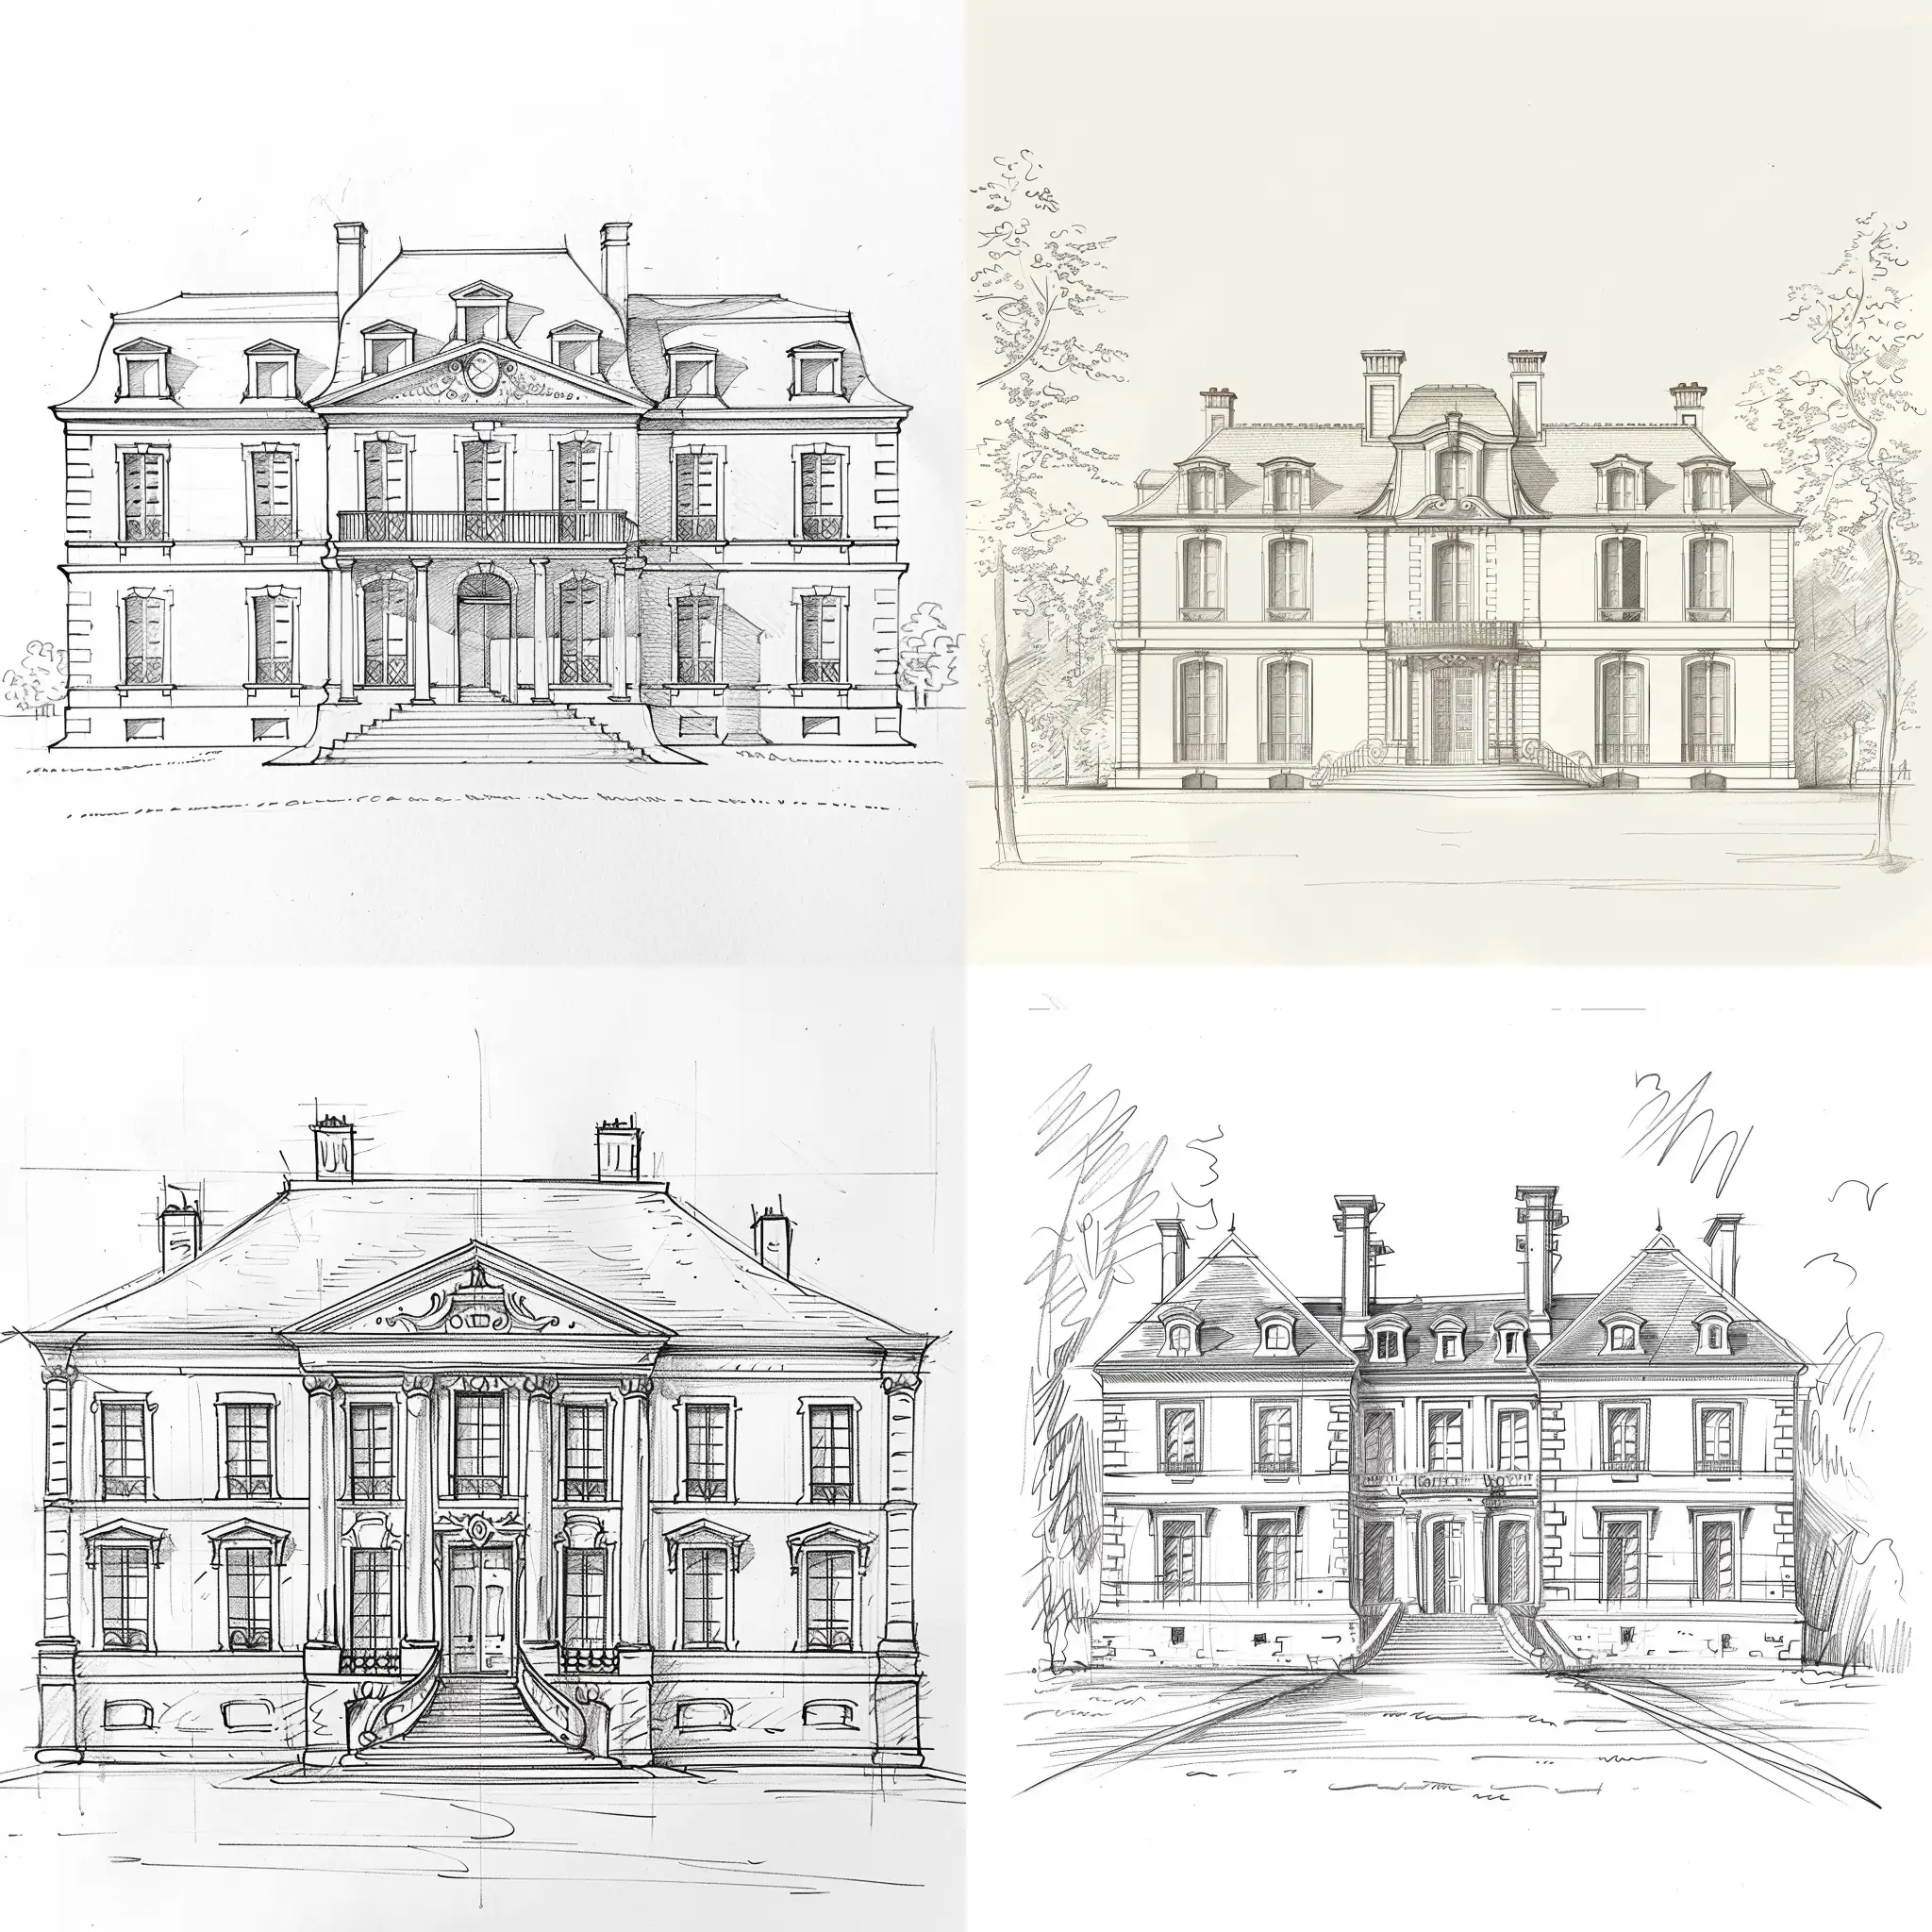 sketch, stylised french chateau 18th century, two wings and central facade, three levels, front view, simple, lines